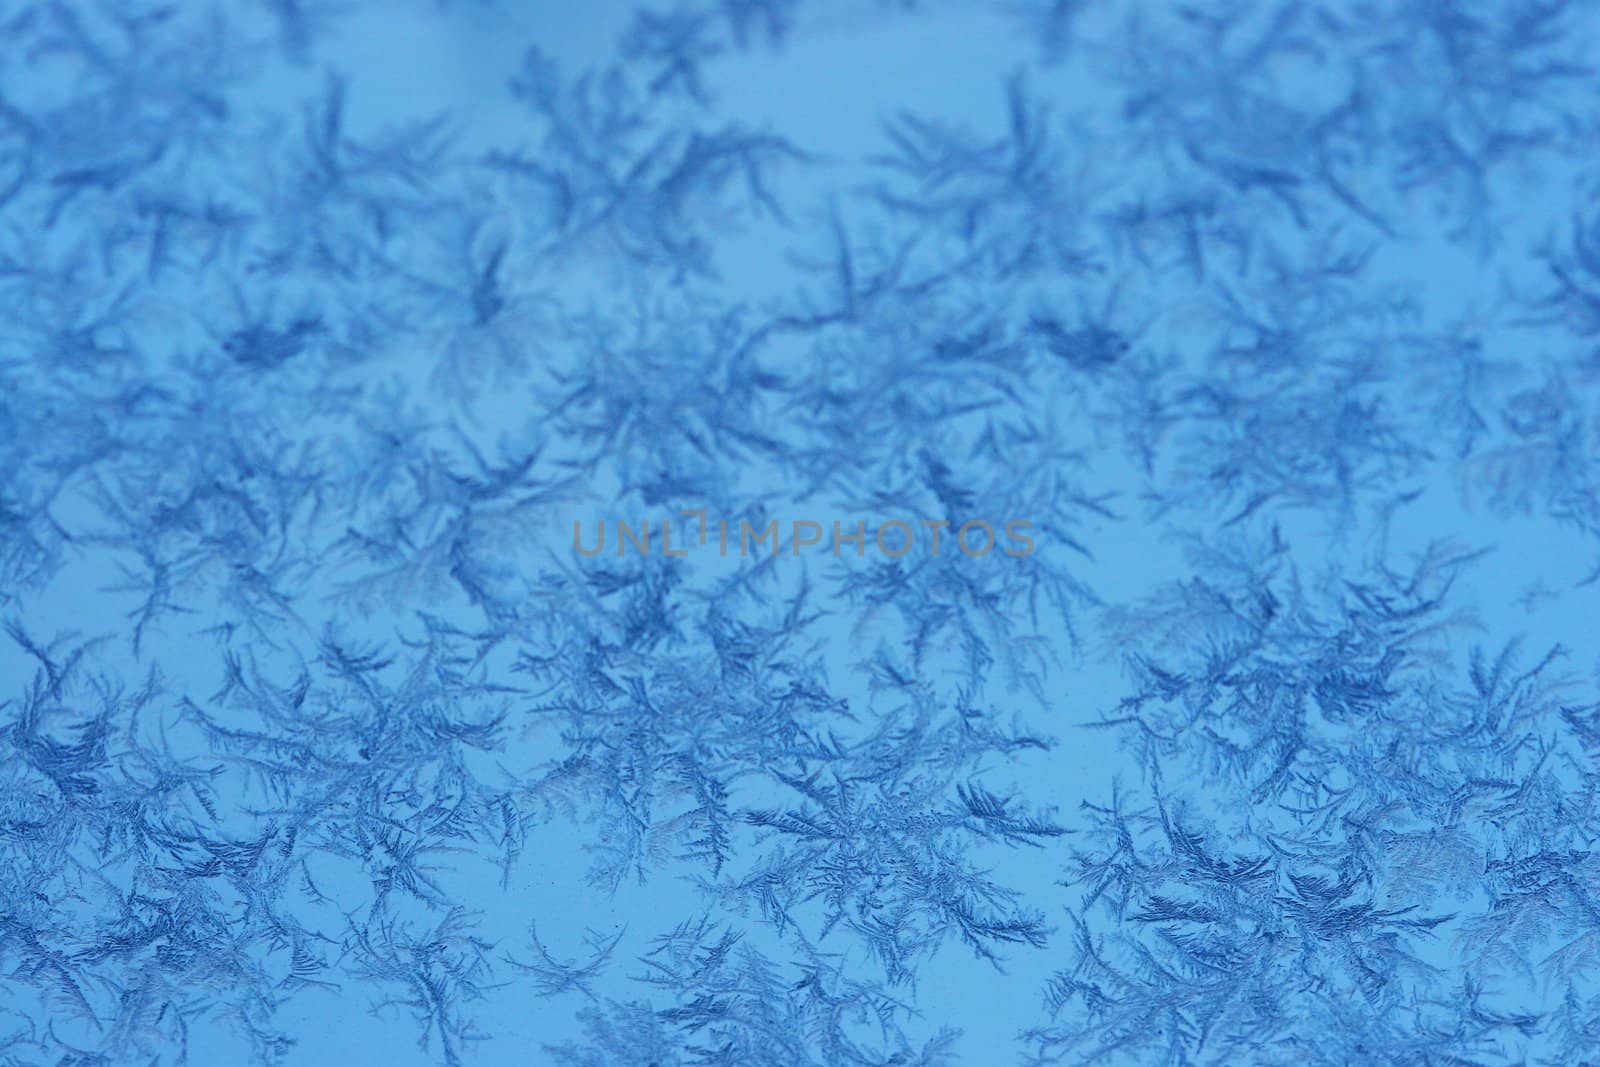 Macro of Frost crystals - focus on crystals in lower half of photo